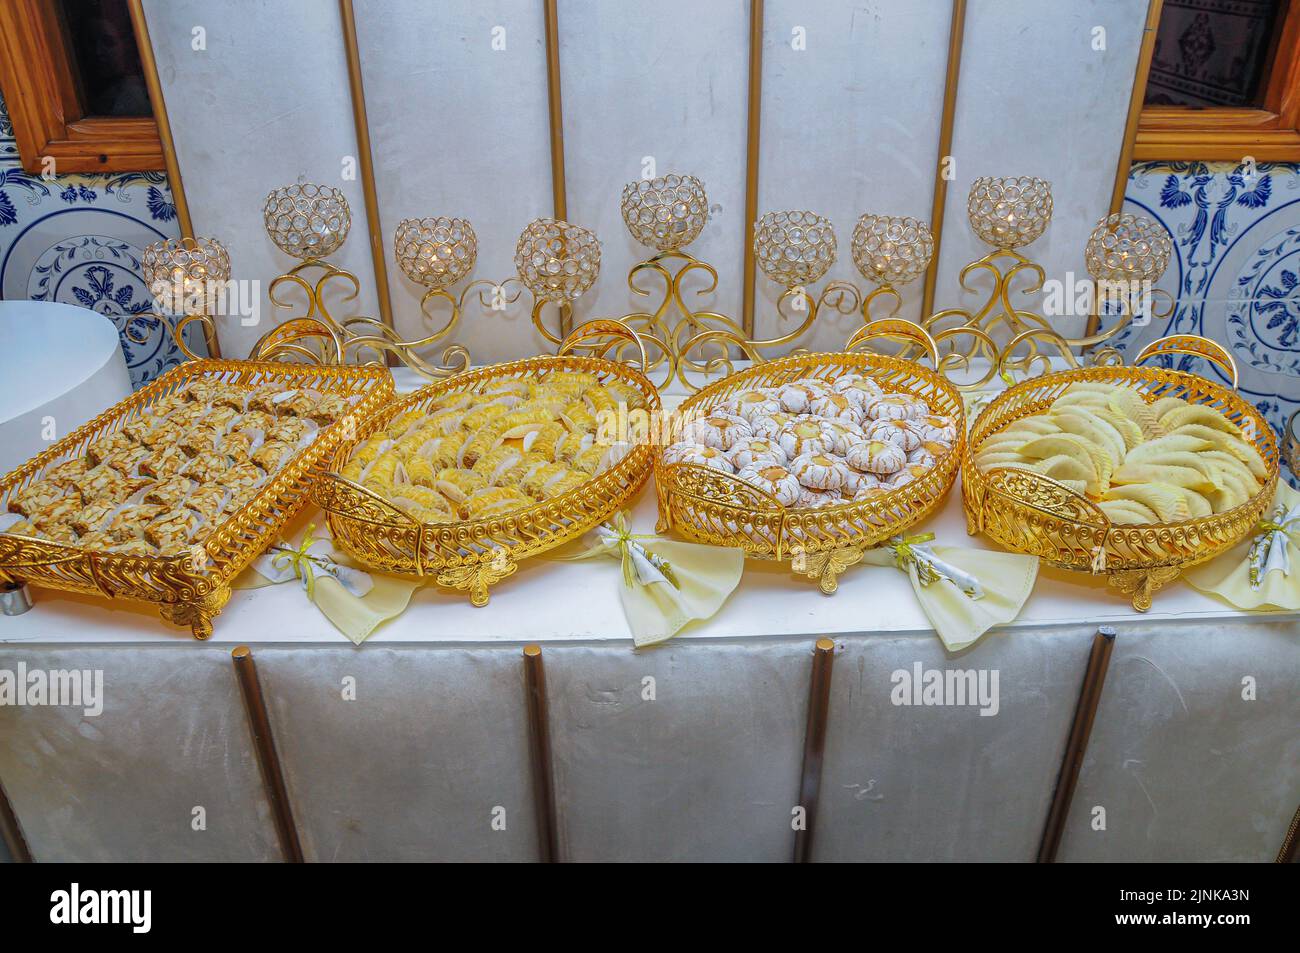 Moroccan biscuit buffet at the entrance of a Moroccan wedding hall Stock Photo